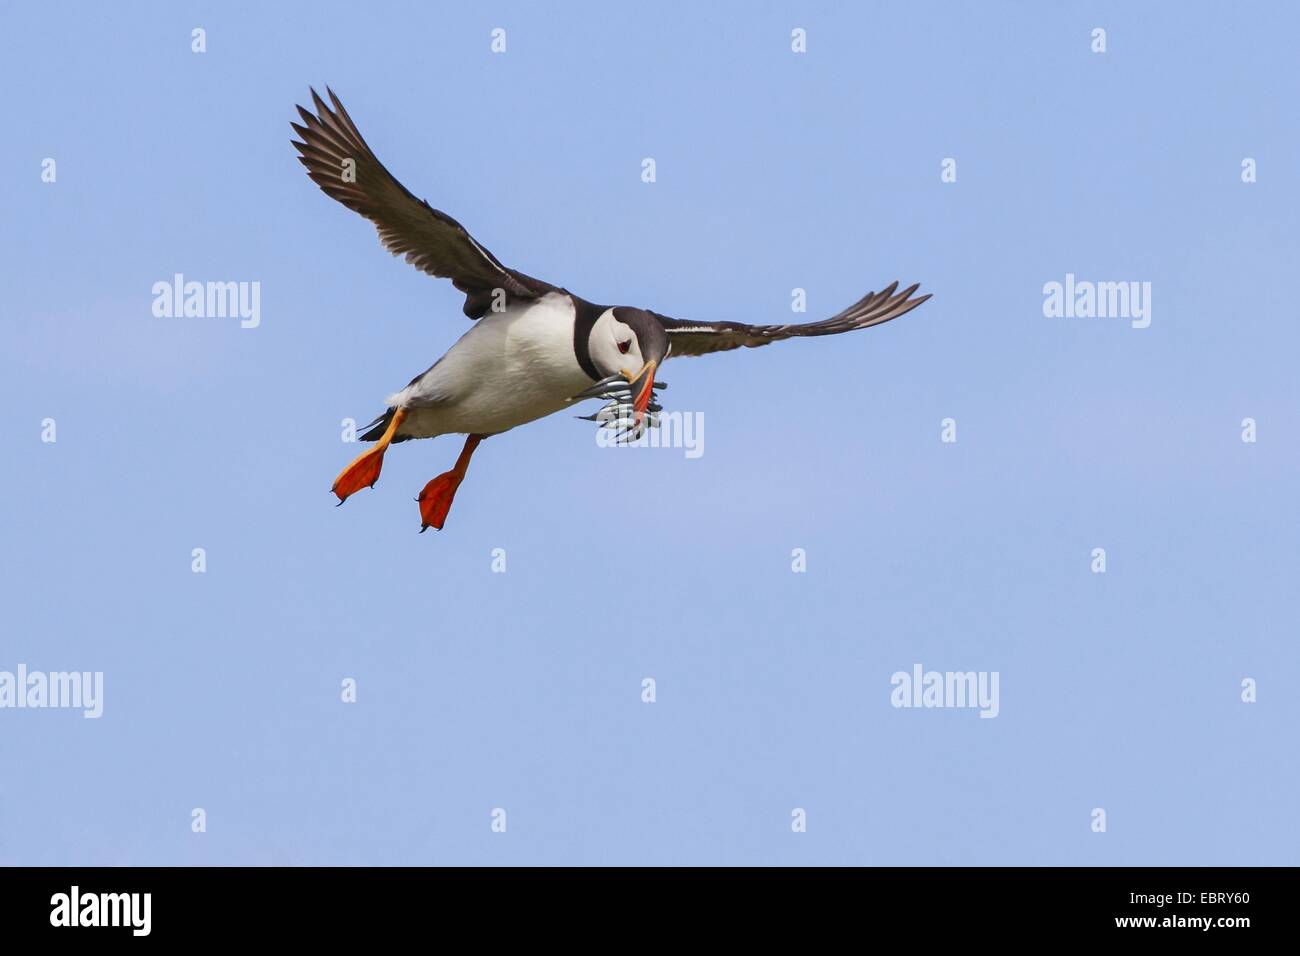 Atlantic puffin, Common puffin (Fratercula arctica), flying with fishes in the beak, United Kingdom, Scotland Stock Photo